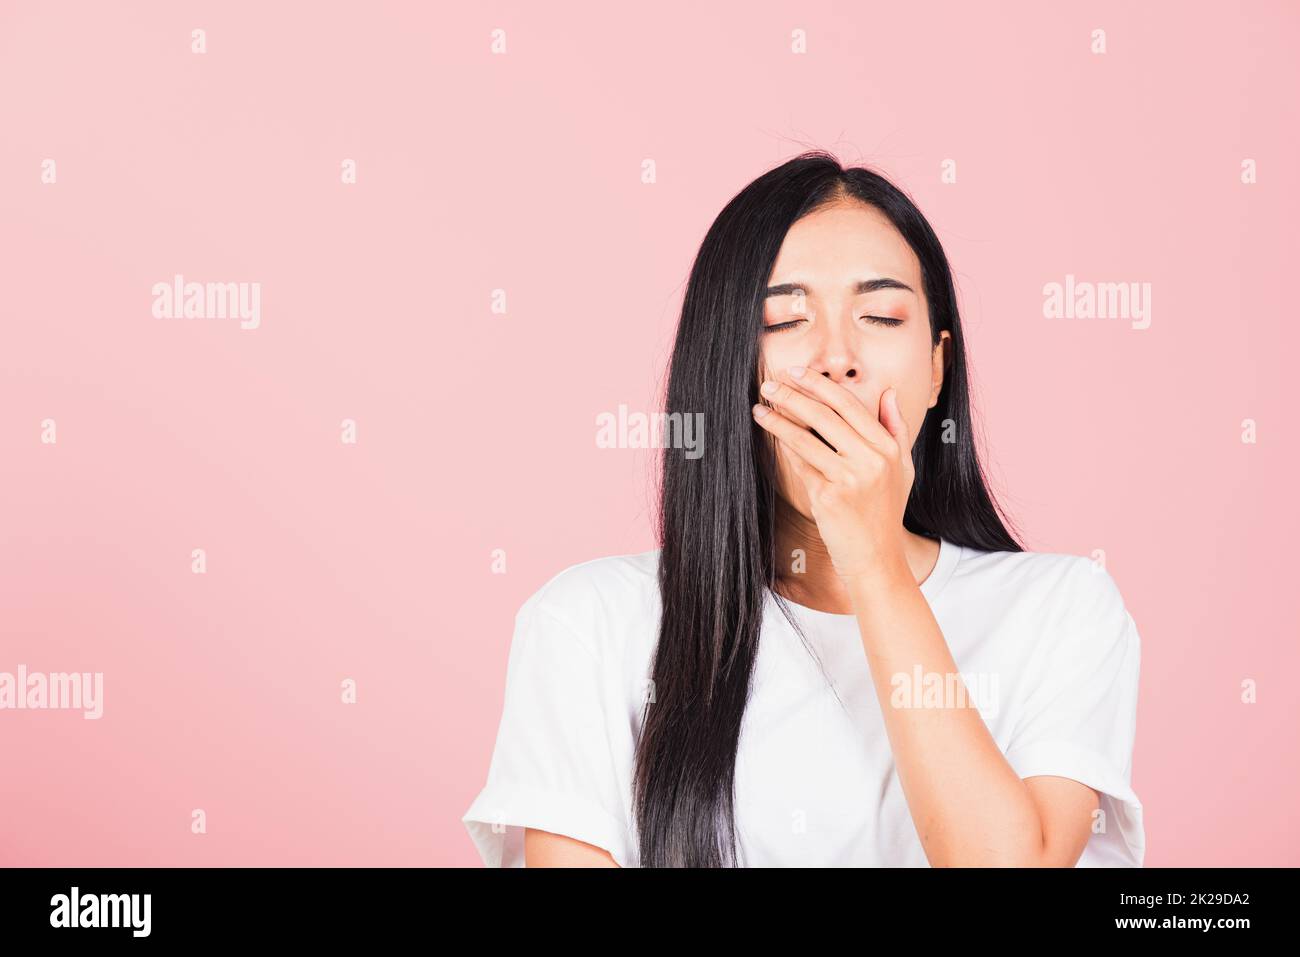 woman emotions tired and sleepy her yawning covering mouth open by hand Stock Photo